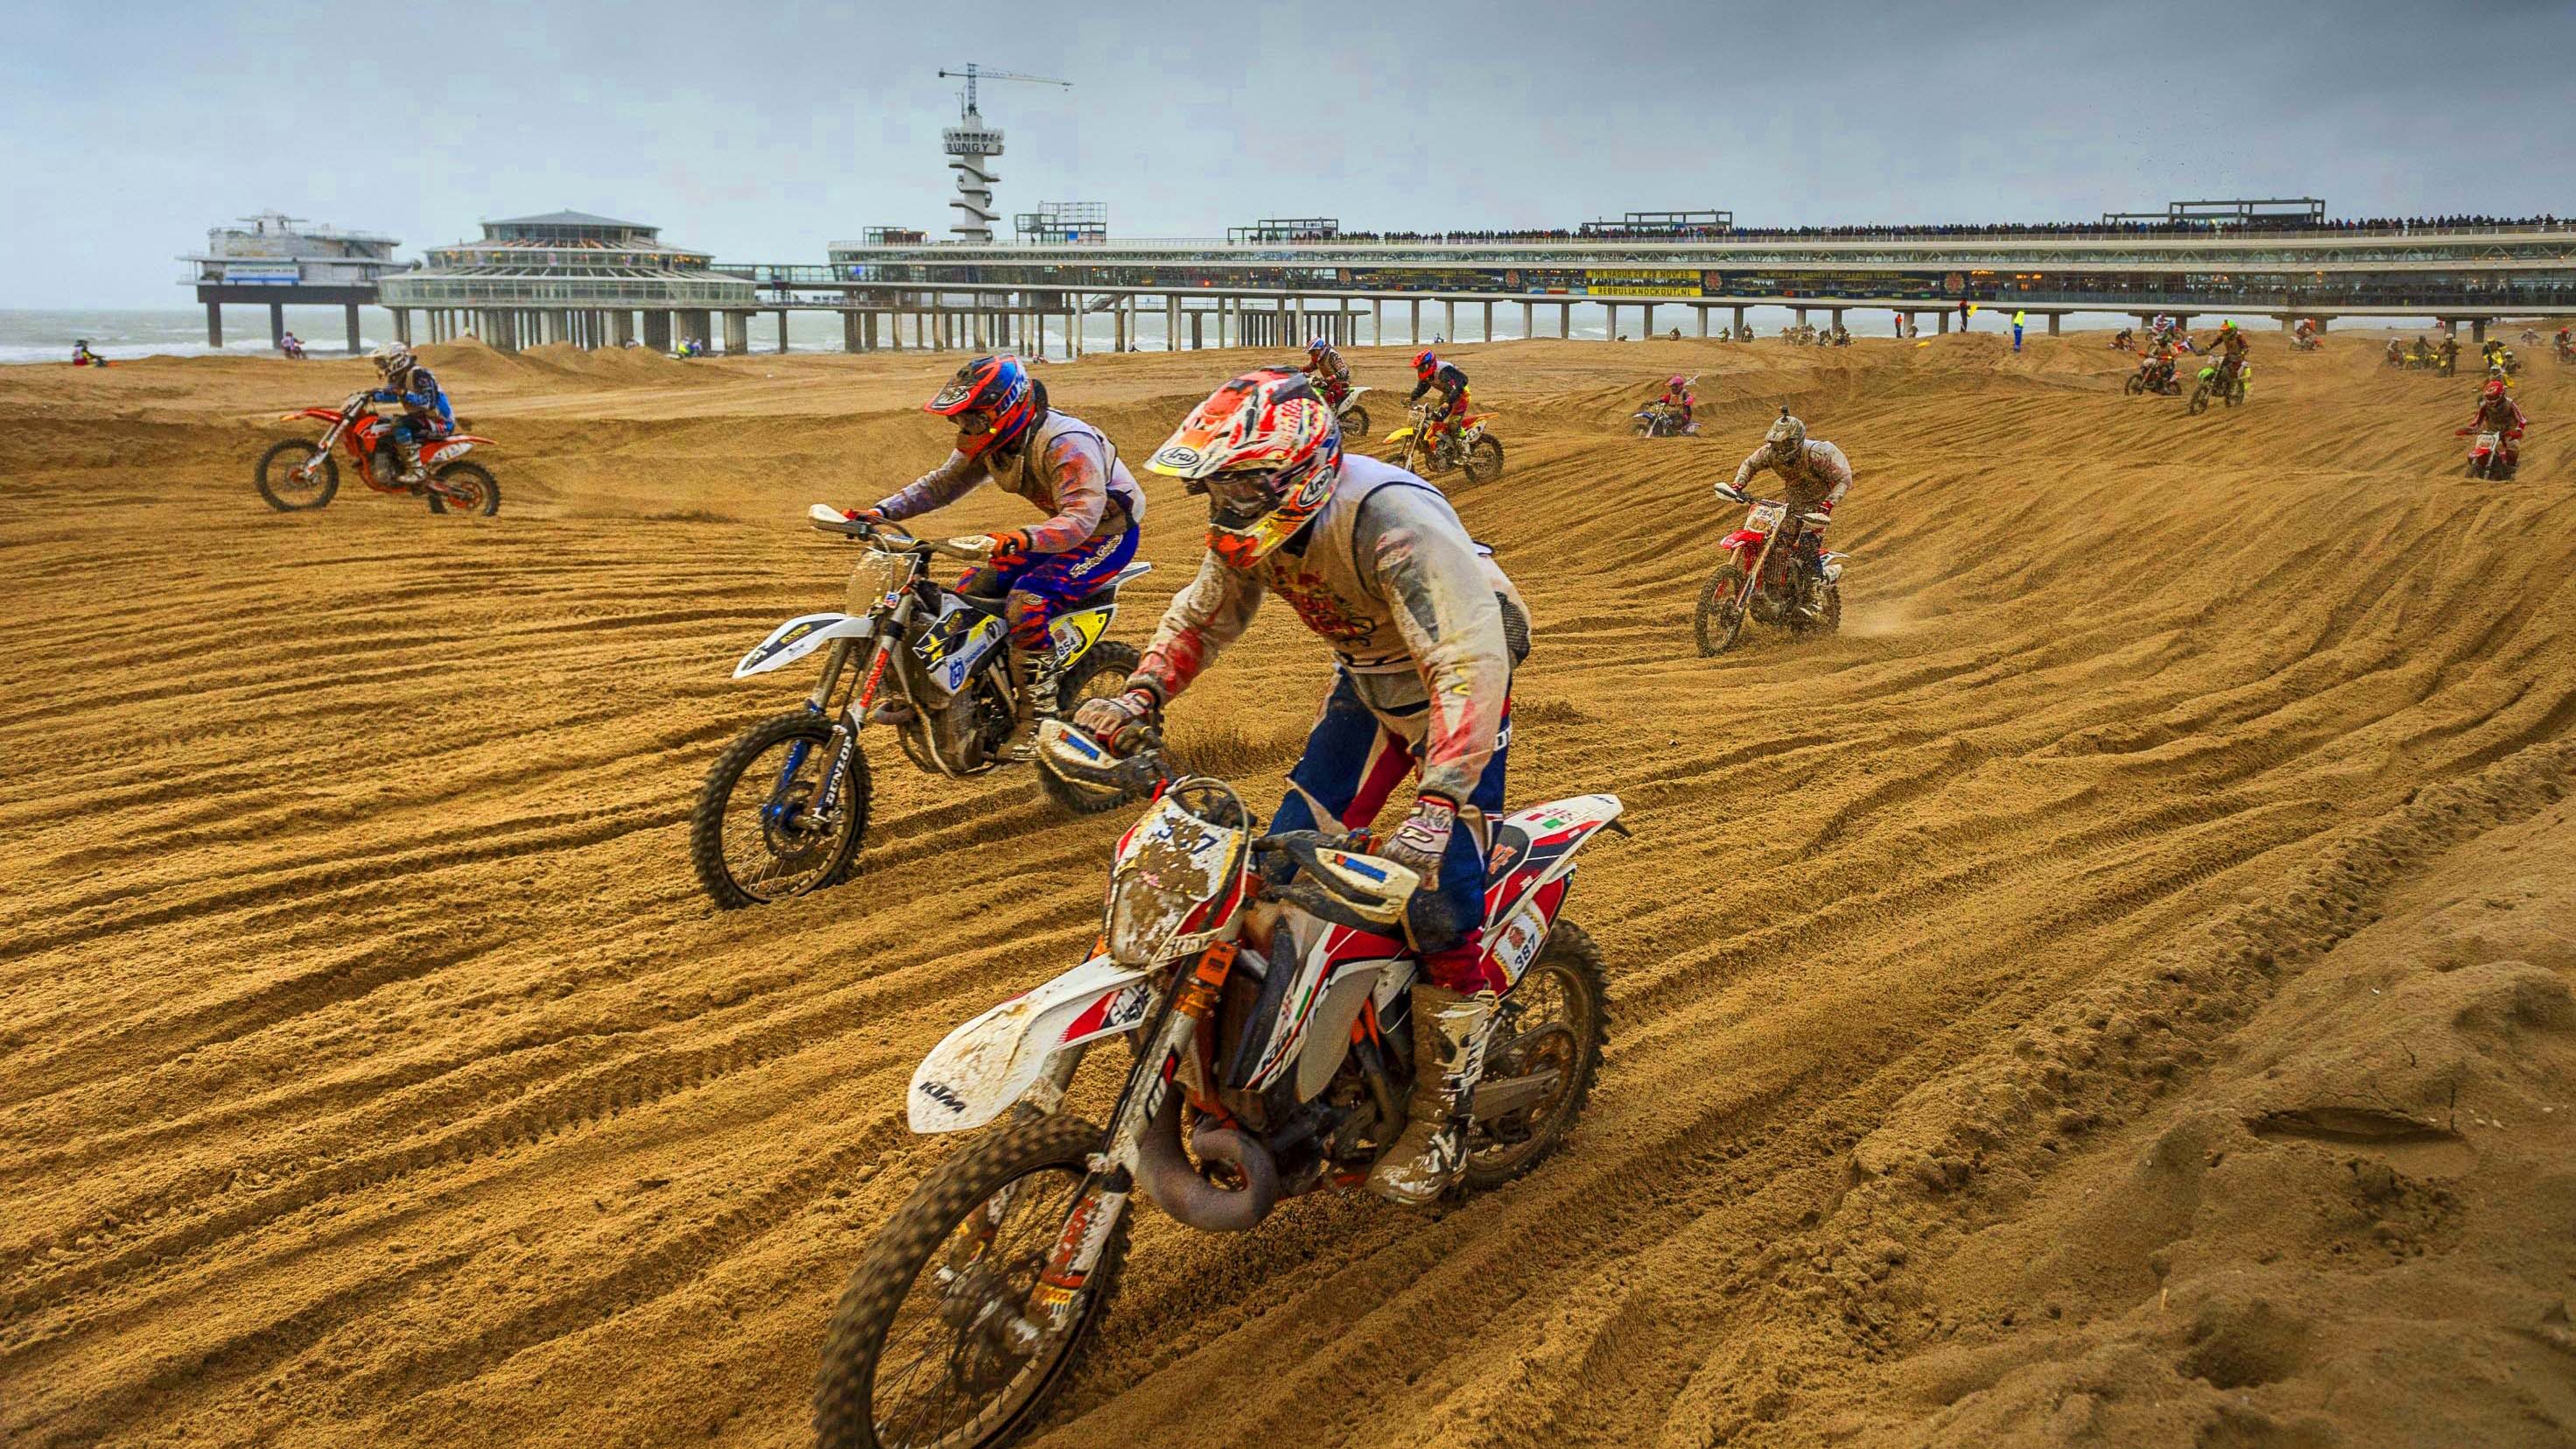 Mass Dirt Bike Racing on Hague Beach | Red Bull Knock Out - YouTube